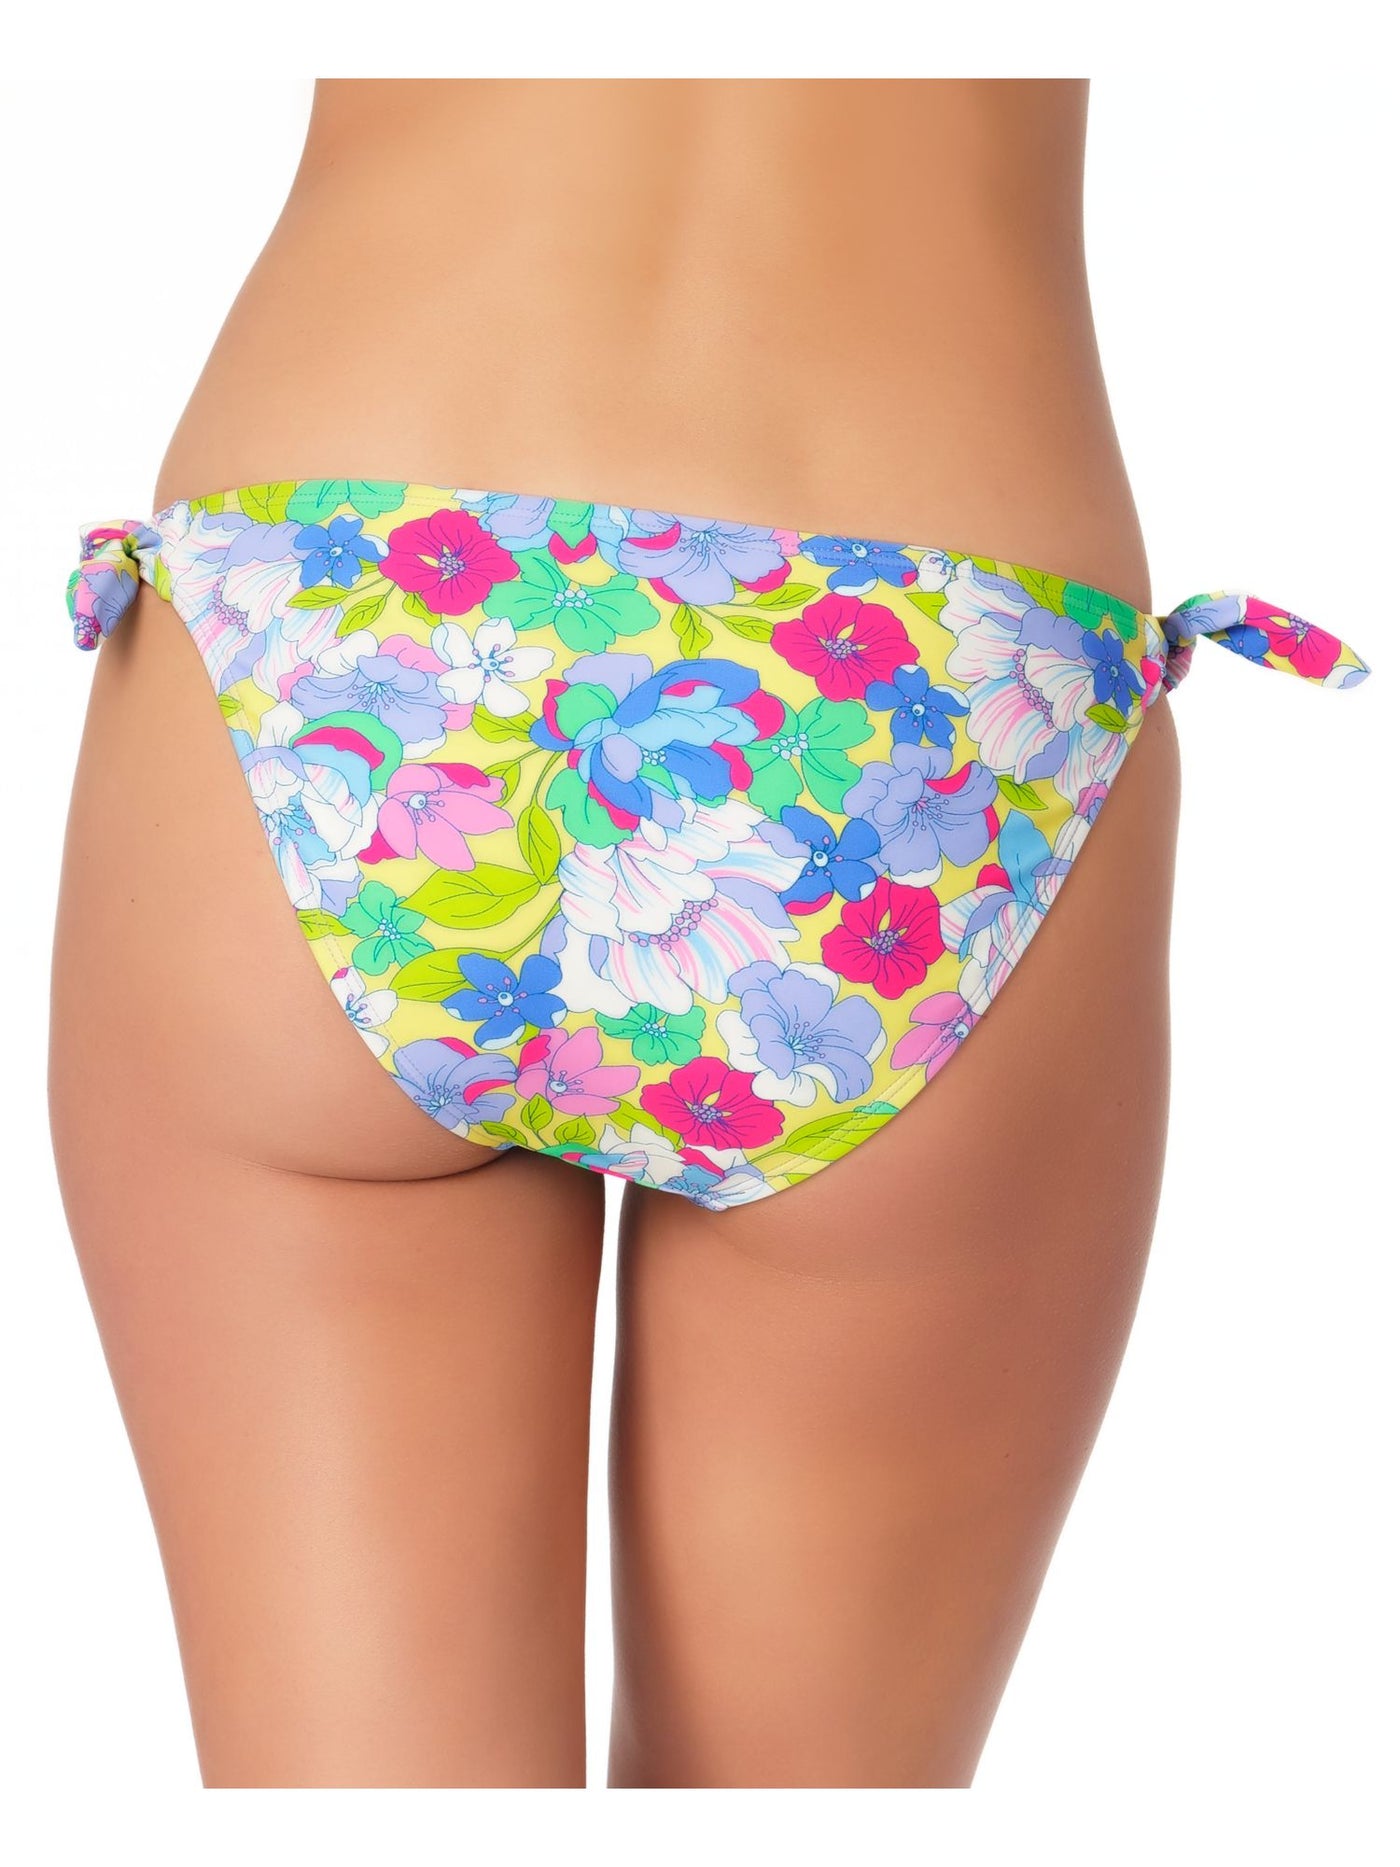 California Waves Women's Multi Color Floral Stretch LINED Moderate Coverage Tie Hipster Swimsuit Bottom M